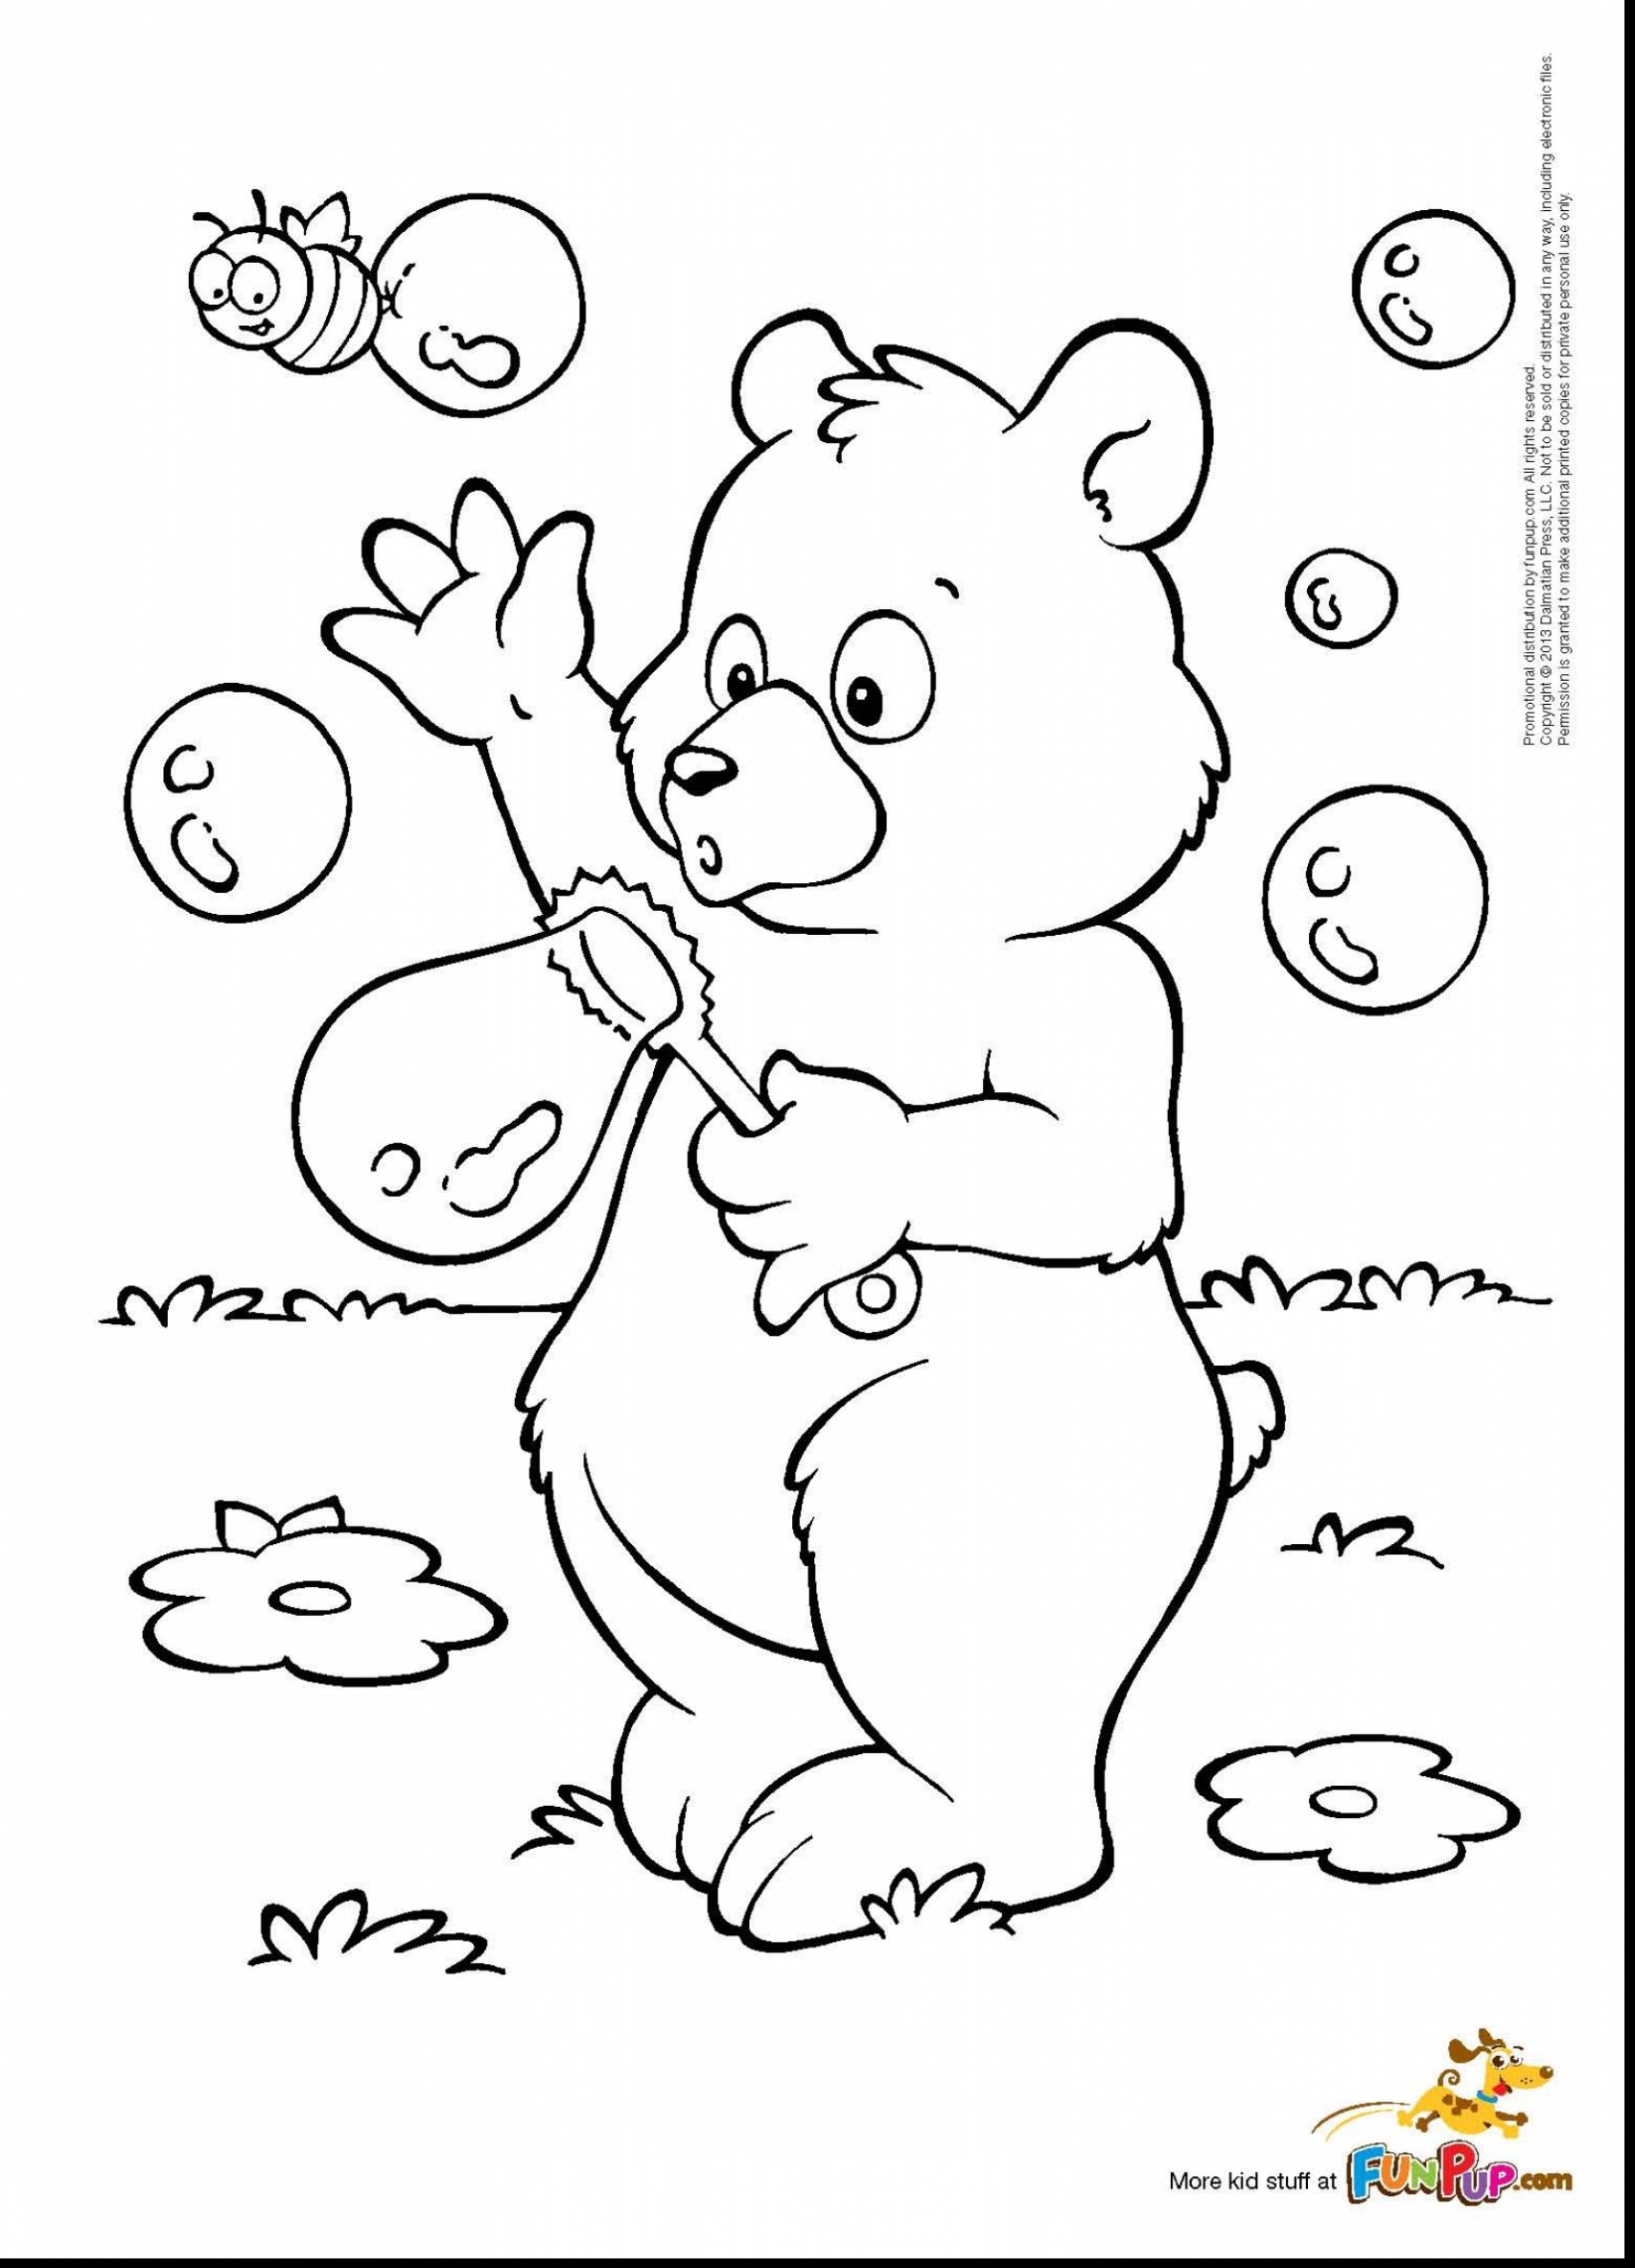 blowing-bubbles-coloring-pages-at-getdrawings-free-download